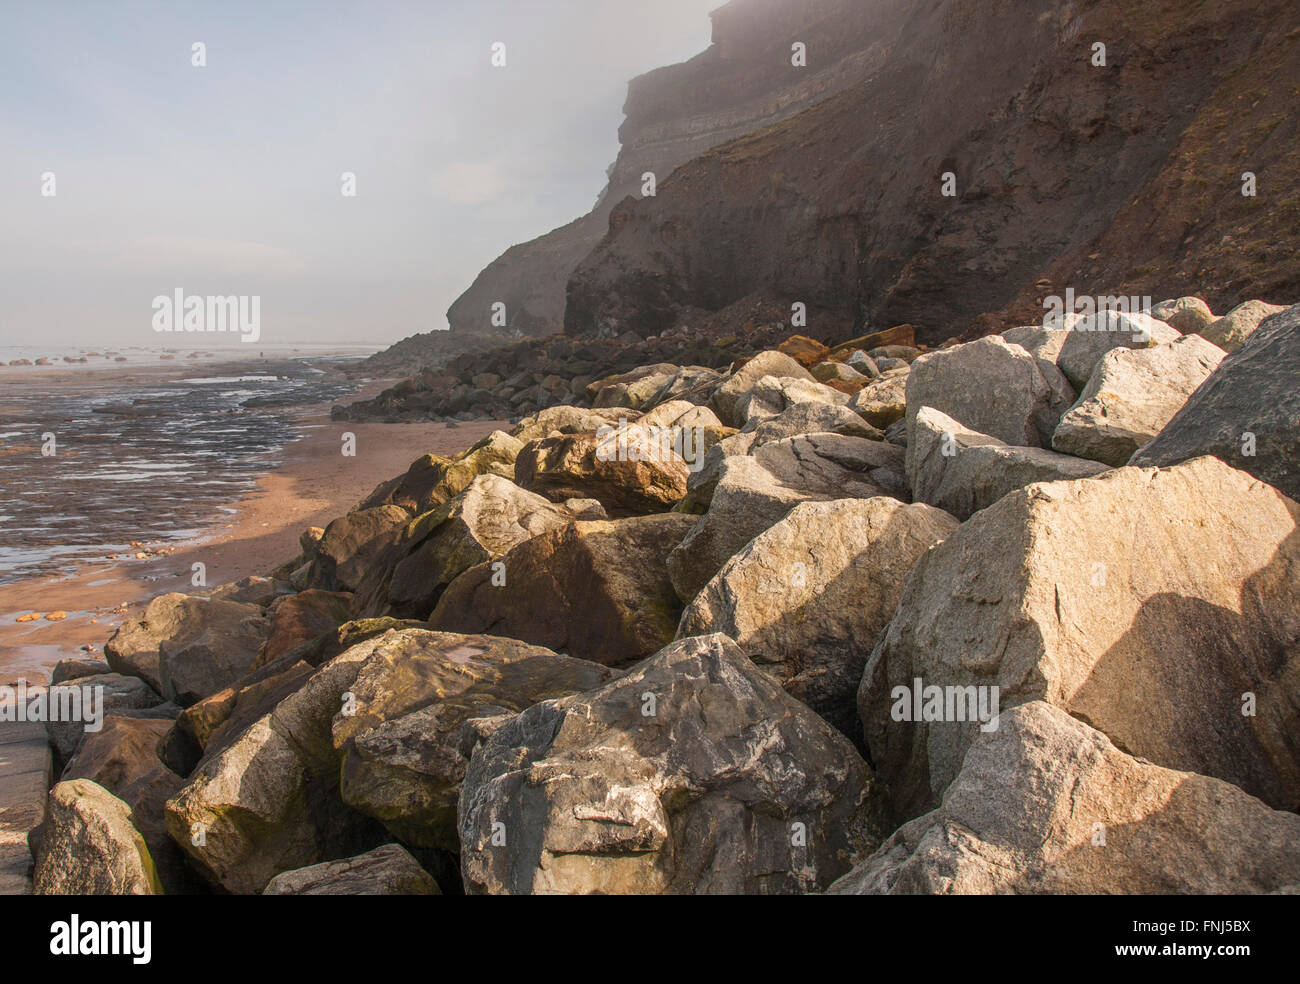 A foggy day in Whitby in North Yorkshire showing the rocky beach and cliffs Stock Photo